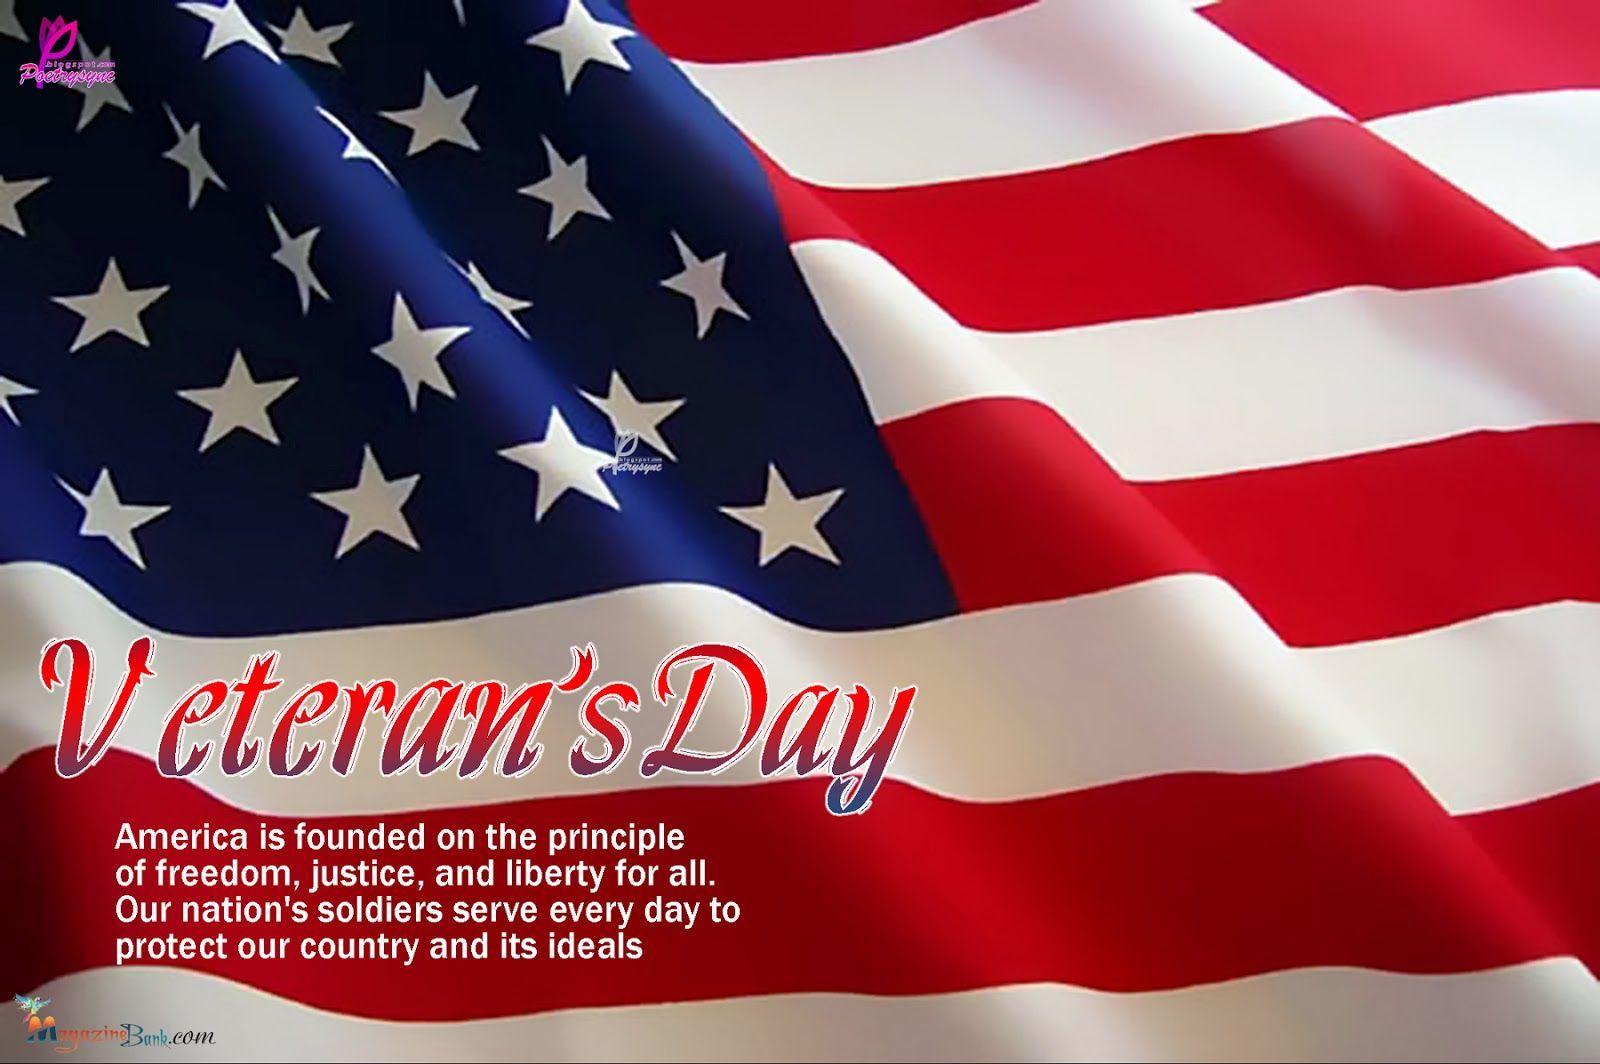 Happy Veterans Day 2014 Picture, Image, Wallpaper, Photo